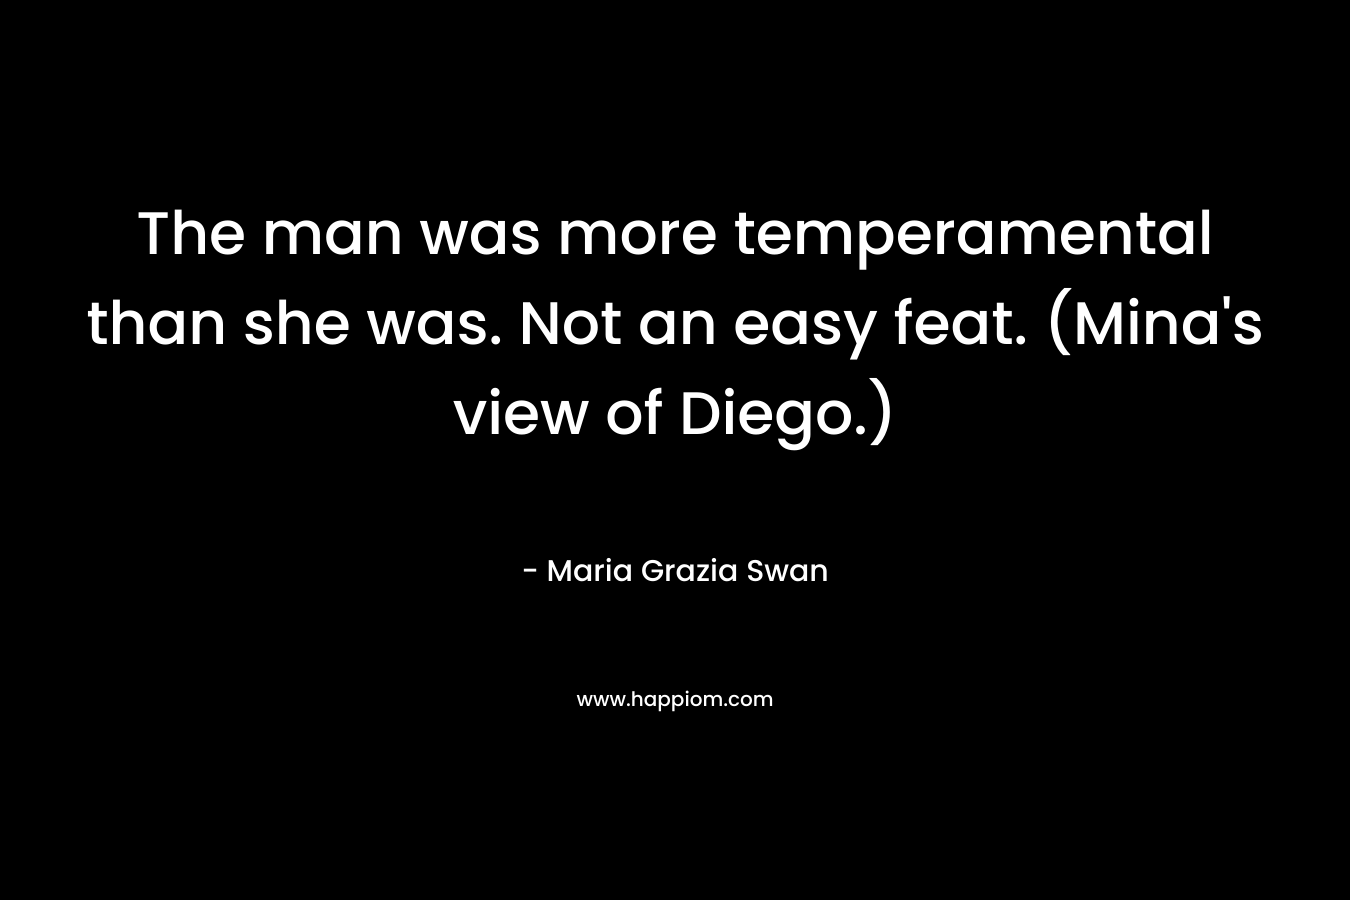 The man was more temperamental than she was. Not an easy feat. (Mina’s view of Diego.) – Maria Grazia Swan